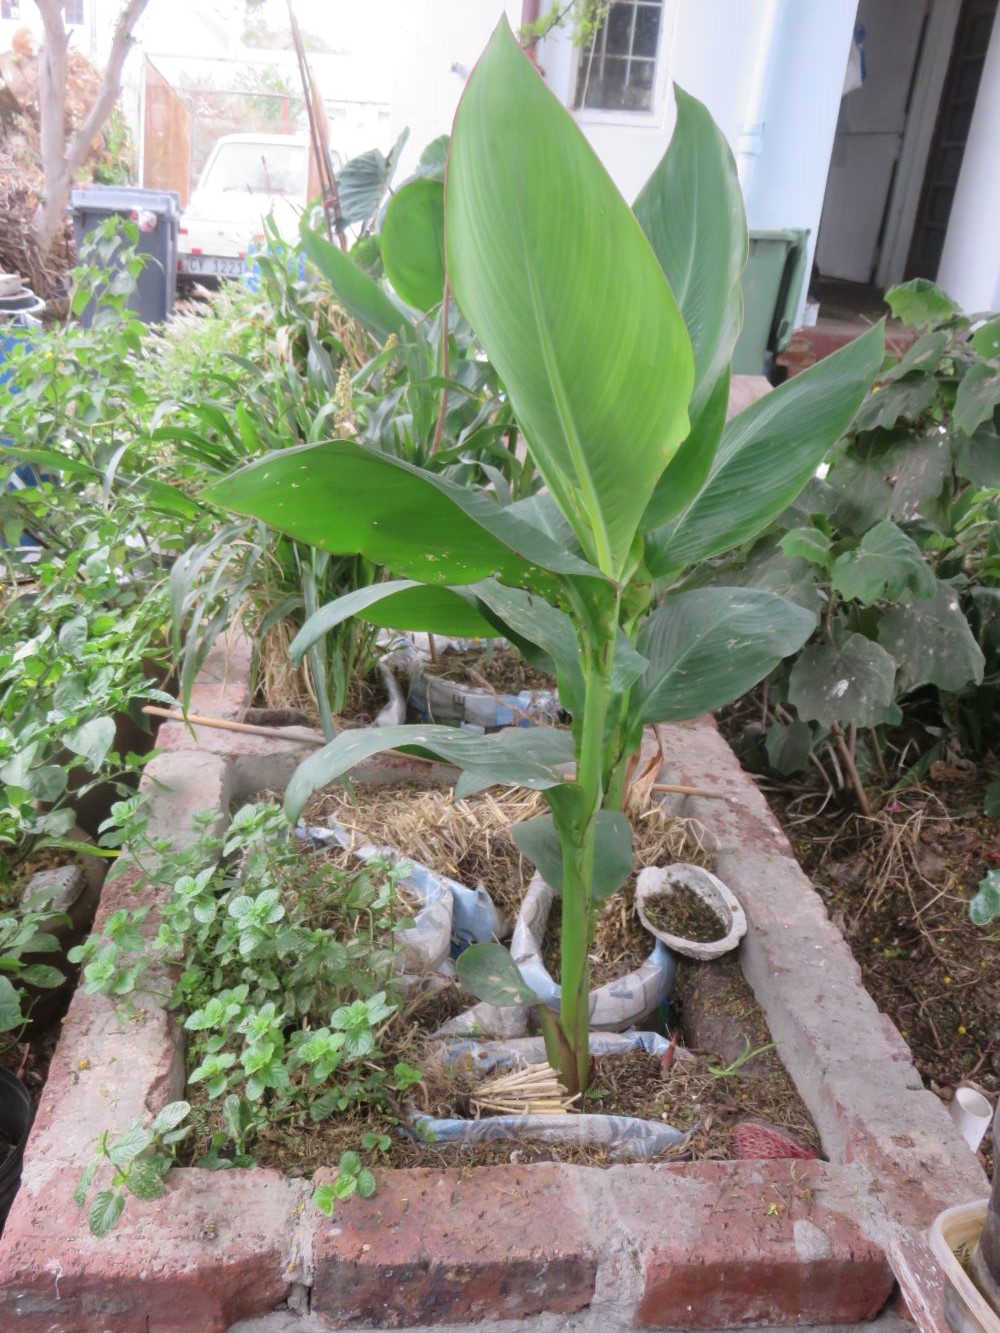 Perennial root vegetable, cannas, growing in the grey water system which uses soil to clean dirty water.